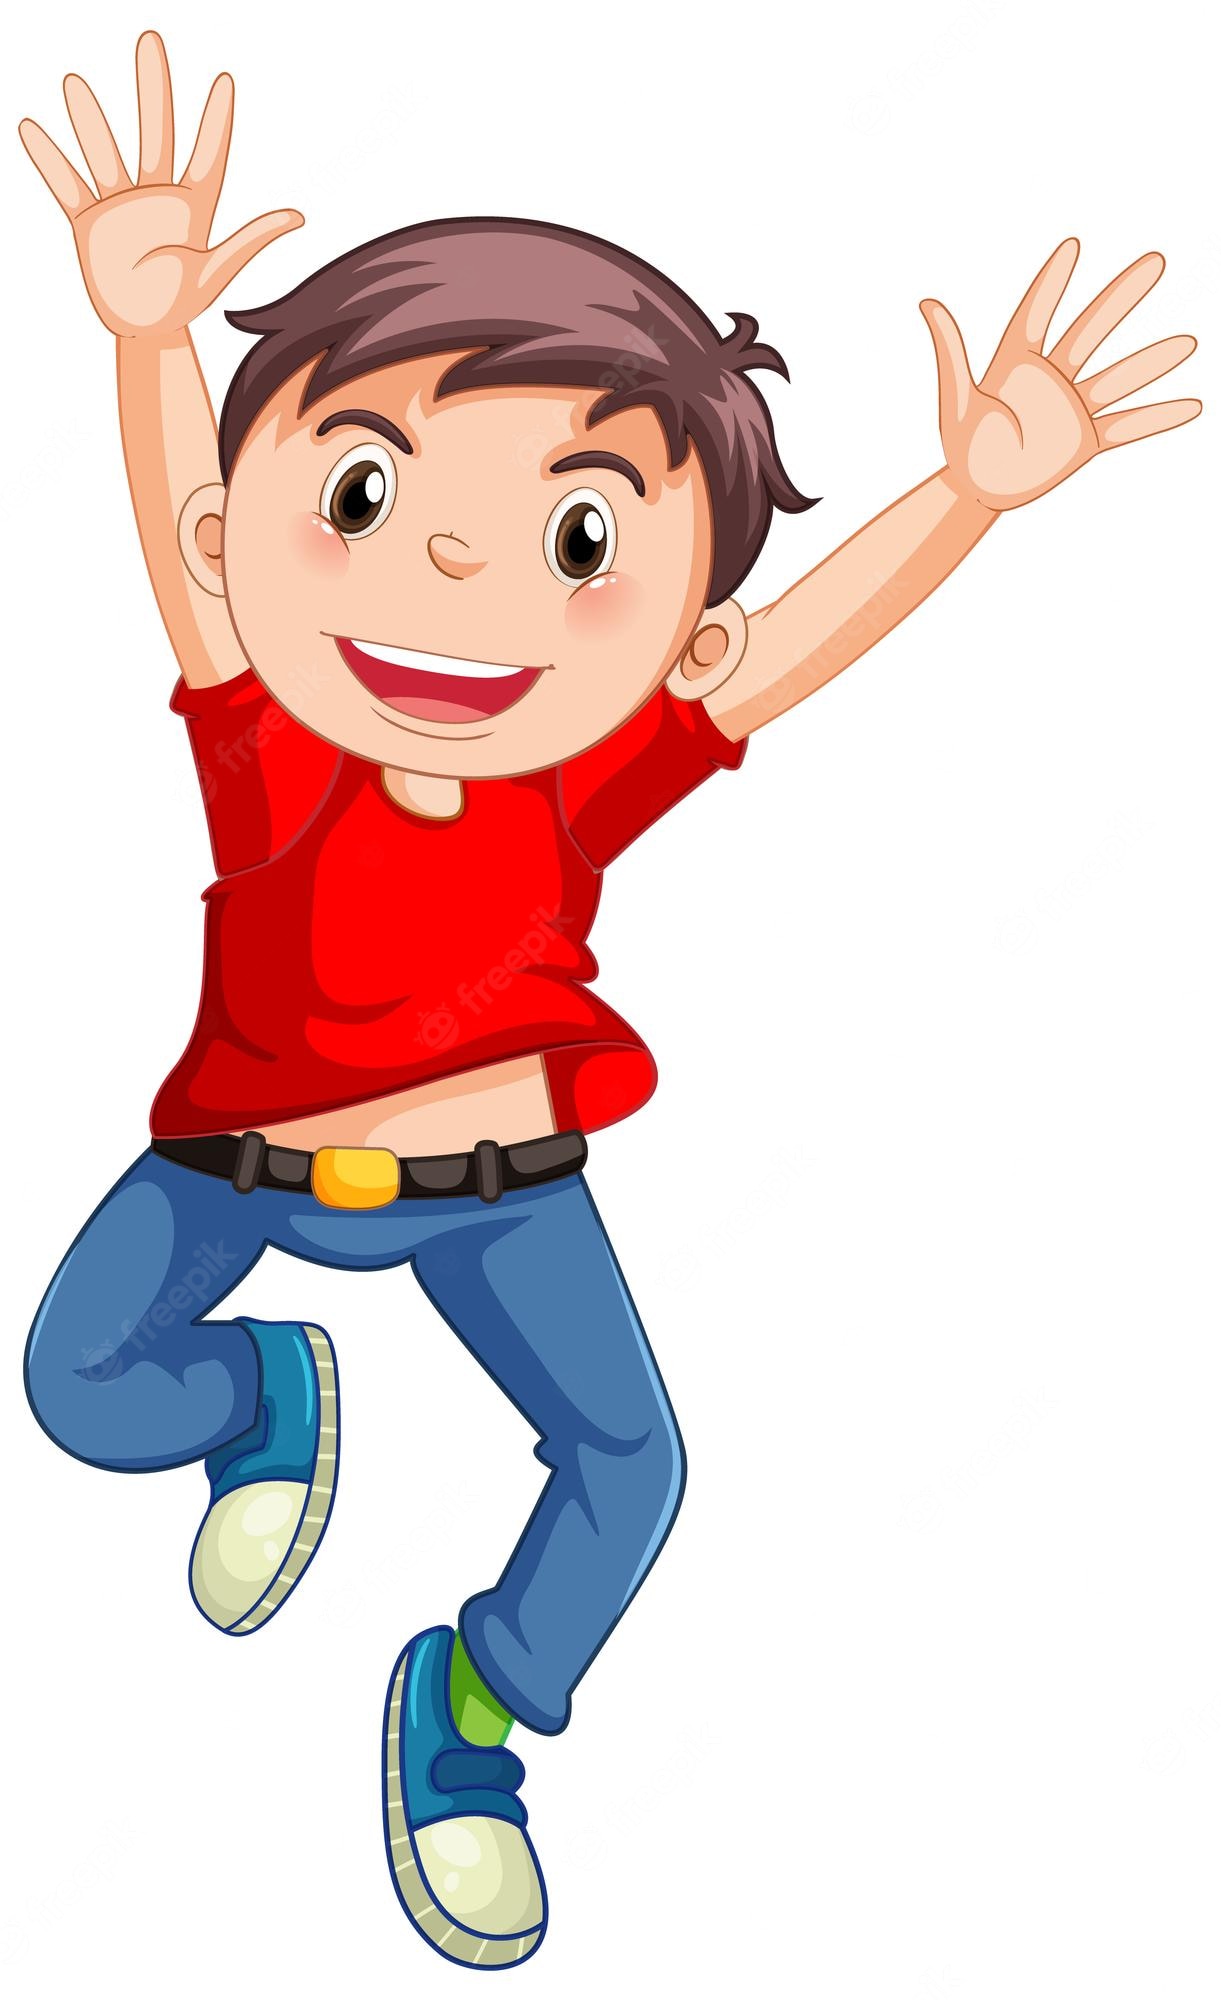 Kids Jump Cartoon Images - Free Download on Clipart Library - Clip Art ...